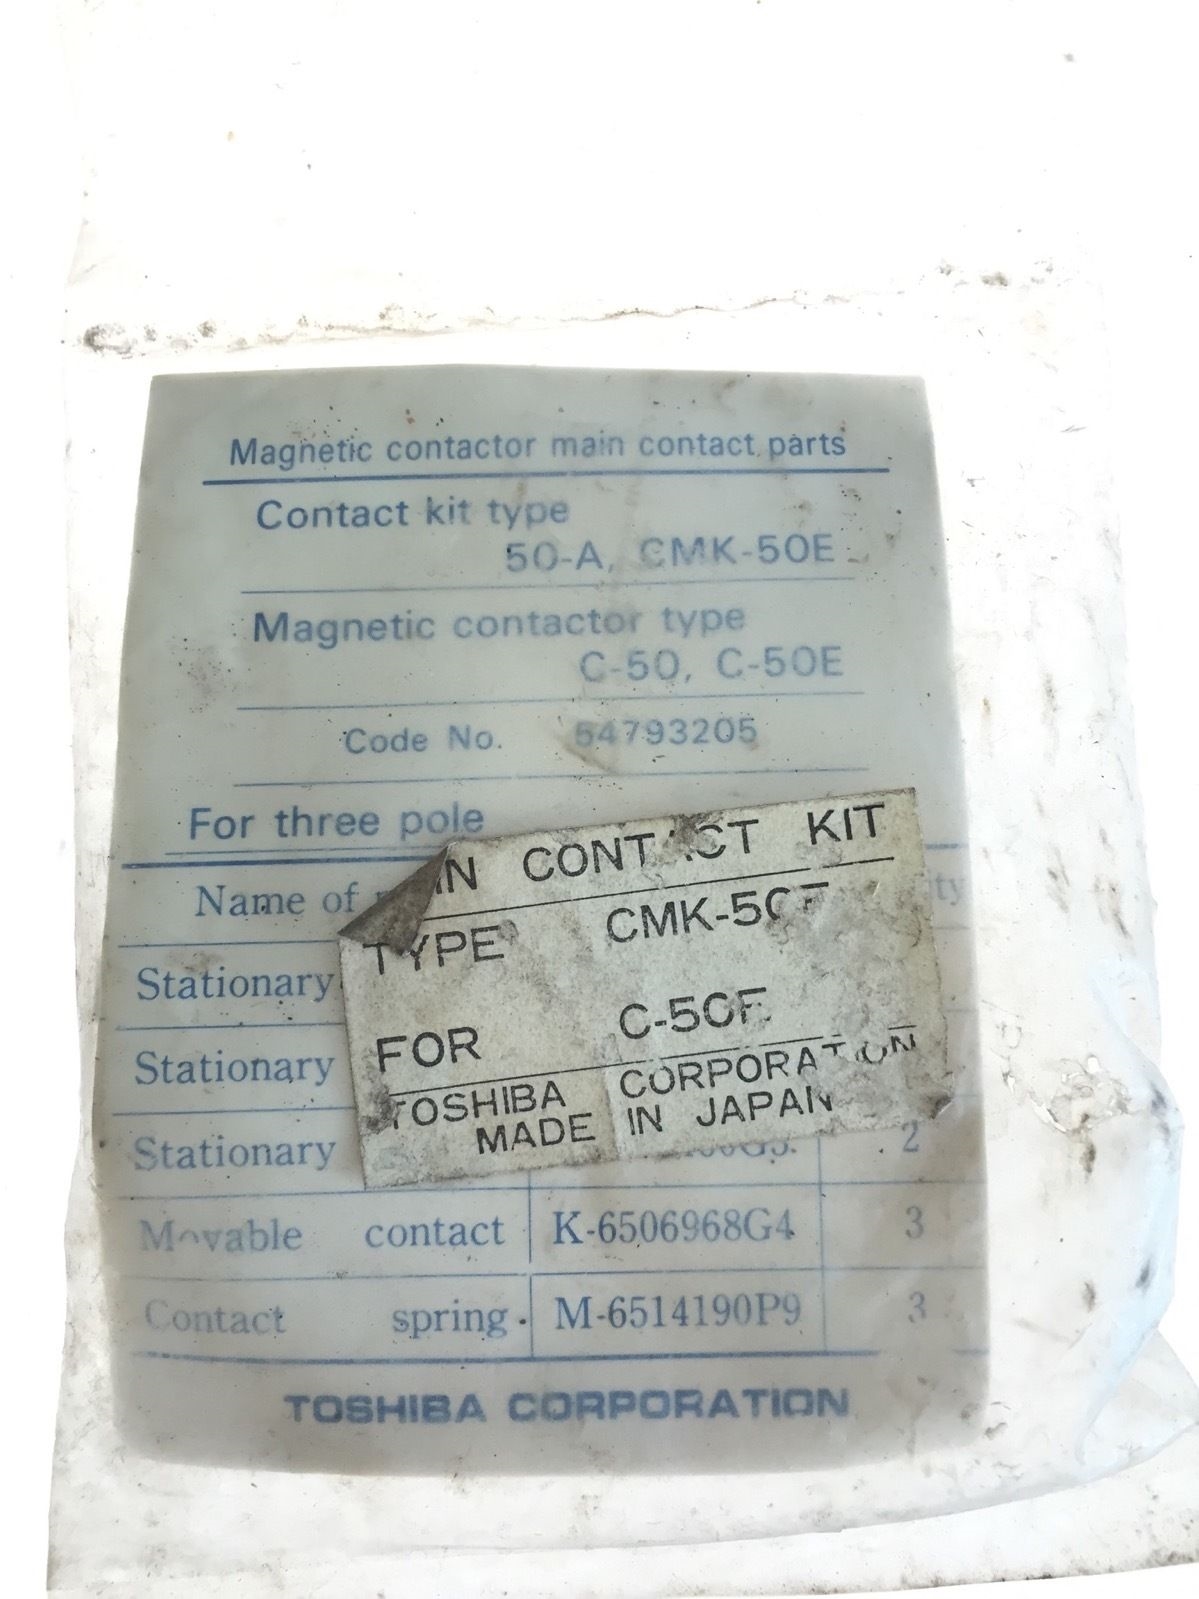 NEW IN BAG Toshiba Magnetic Contactor Kit 50-A CMK-50E C-50 C-50E, (H87) 1